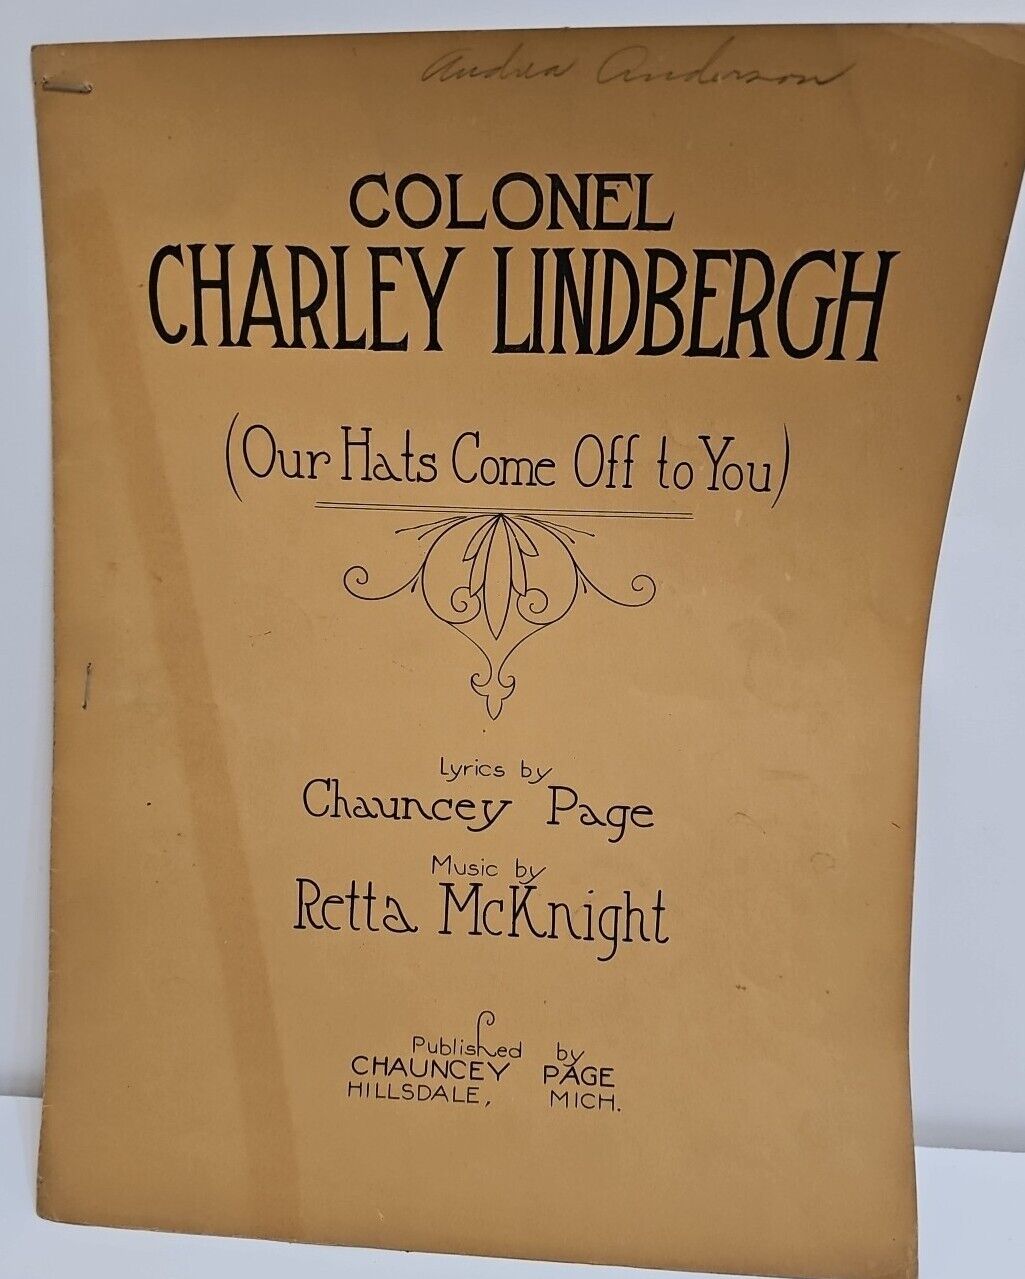 Colonel Charley Lindbergh” sheet music; VERY RARE; 1927 Chauncey Page